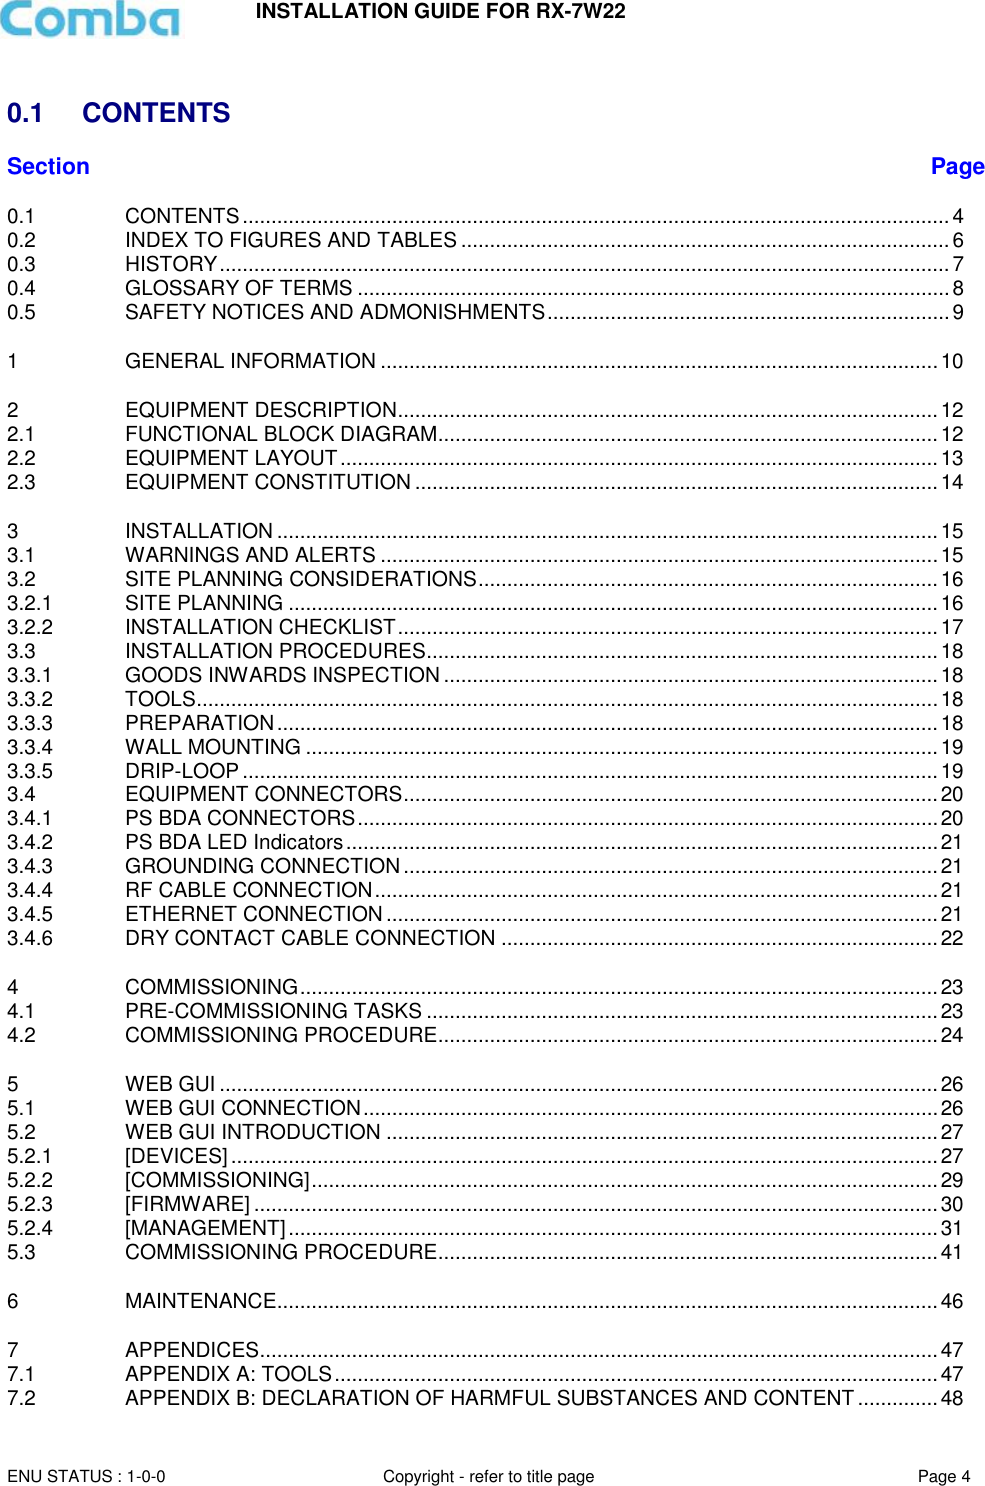 INSTALLATION GUIDE FOR RX-7W22  ENU STATUS : 1-0-0 Copyright - refer to title page Page 4      0.1  CONTENTS Section Page 0.1 CONTENTS ........................................................................................................................... 4 0.2 INDEX TO FIGURES AND TABLES ..................................................................................... 6 0.3 HISTORY ............................................................................................................................... 7 0.4 GLOSSARY OF TERMS ....................................................................................................... 8 0.5 SAFETY NOTICES AND ADMONISHMENTS ...................................................................... 9 1 GENERAL INFORMATION ................................................................................................. 10 2 EQUIPMENT DESCRIPTION .............................................................................................. 12 2.1 FUNCTIONAL BLOCK DIAGRAM ....................................................................................... 12 2.2 EQUIPMENT LAYOUT ........................................................................................................ 13 2.3 EQUIPMENT CONSTITUTION ........................................................................................... 14 3 INSTALLATION ................................................................................................................... 15 3.1 WARNINGS AND ALERTS ................................................................................................. 15 3.2 SITE PLANNING CONSIDERATIONS ................................................................................ 16 3.2.1 SITE PLANNING ................................................................................................................. 16 3.2.2 INSTALLATION CHECKLIST .............................................................................................. 17 3.3 INSTALLATION PROCEDURES ......................................................................................... 18 3.3.1 GOODS INWARDS INSPECTION ...................................................................................... 18 3.3.2 TOOLS ................................................................................................................................. 18 3.3.3 PREPARATION ................................................................................................................... 18 3.3.4 WALL MOUNTING .............................................................................................................. 19 3.3.5 DRIP-LOOP ......................................................................................................................... 19 3.4 EQUIPMENT CONNECTORS ............................................................................................. 20 3.4.1 PS BDA CONNECTORS ..................................................................................................... 20 3.4.2 PS BDA LED Indicators ....................................................................................................... 21 3.4.3 GROUNDING CONNECTION ............................................................................................. 21 3.4.4 RF CABLE CONNECTION .................................................................................................. 21 3.4.5 ETHERNET CONNECTION ................................................................................................ 21 3.4.6 DRY CONTACT CABLE CONNECTION ............................................................................ 22 4 COMMISSIONING ............................................................................................................... 23 4.1 PRE-COMMISSIONING TASKS ......................................................................................... 23 4.2 COMMISSIONING PROCEDURE ....................................................................................... 24 5 WEB GUI ............................................................................................................................. 26 5.1 WEB GUI CONNECTION .................................................................................................... 26 5.2 WEB GUI INTRODUCTION ................................................................................................ 27 5.2.1 [DEVICES] ........................................................................................................................... 27 5.2.2 [COMMISSIONING] ............................................................................................................. 29 5.2.3 [FIRMWARE] ....................................................................................................................... 30 5.2.4 [MANAGEMENT] ................................................................................................................. 31 5.3 COMMISSIONING PROCEDURE ....................................................................................... 41 6 MAINTENANCE................................................................................................................... 46 7 APPENDICES ...................................................................................................................... 47 7.1 APPENDIX A: TOOLS ......................................................................................................... 47 7.2 APPENDIX B: DECLARATION OF HARMFUL SUBSTANCES AND CONTENT .............. 48 